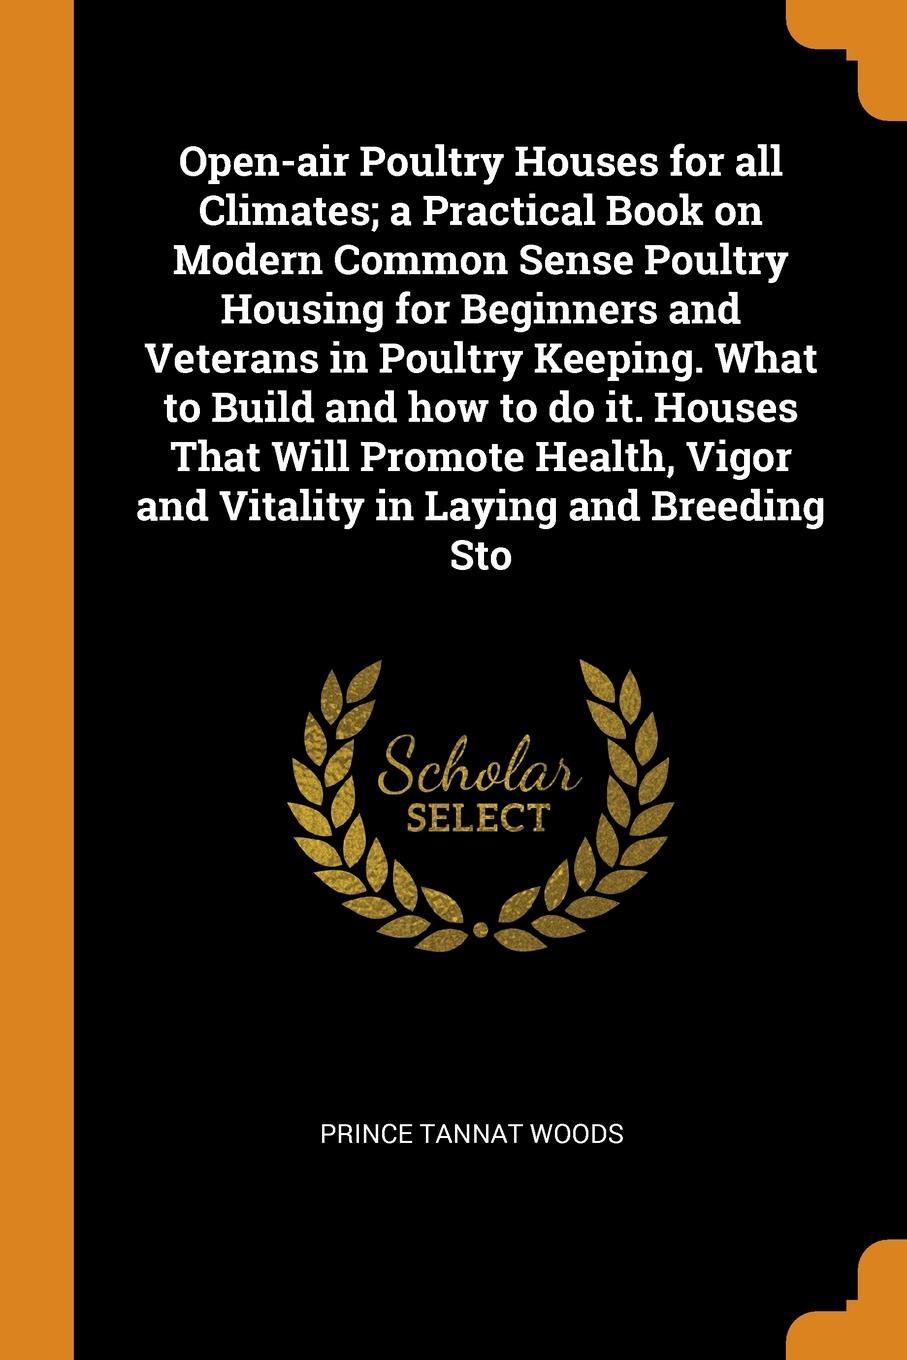 Open-air Poultry Houses for all Climates; a Practical Book on Modern Common Sense Poultry Housing for Beginners and Veterans in Poultry Keeping. What to Build and how to do it. Houses That Will Promote Health, Vigor and Vitality in Laying and Bree...